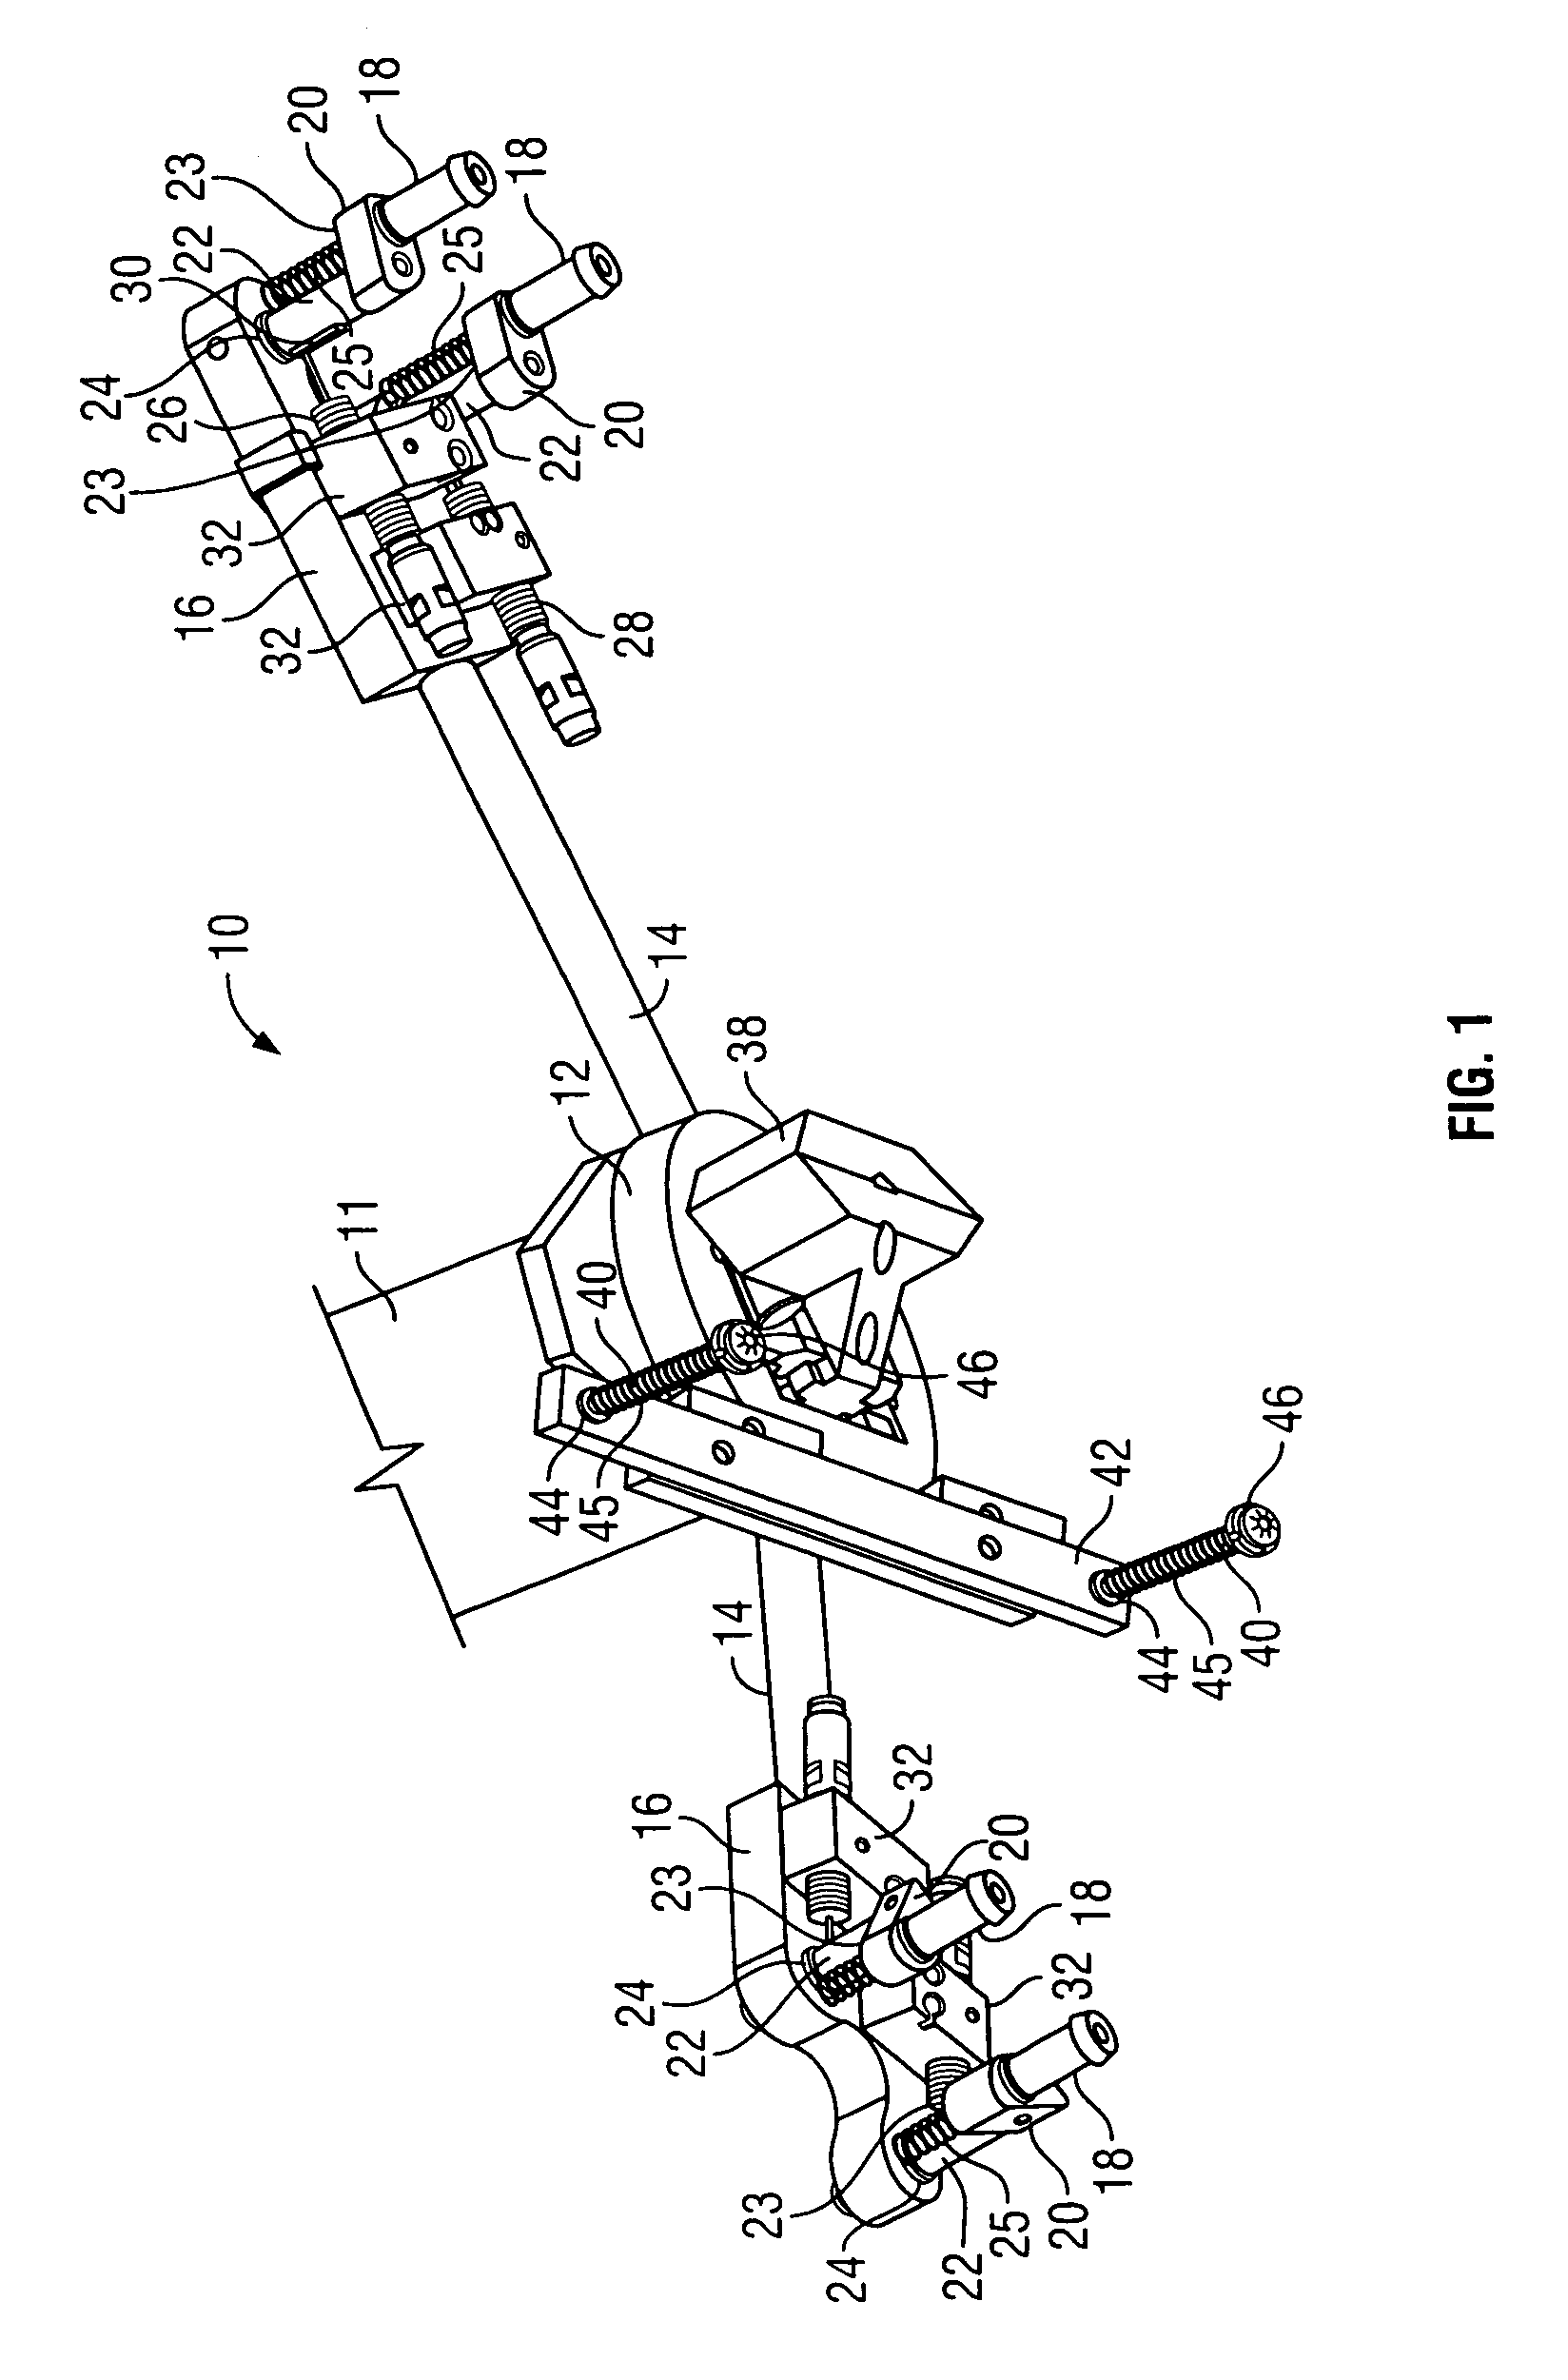 Ophthalmic lens manufacturing system